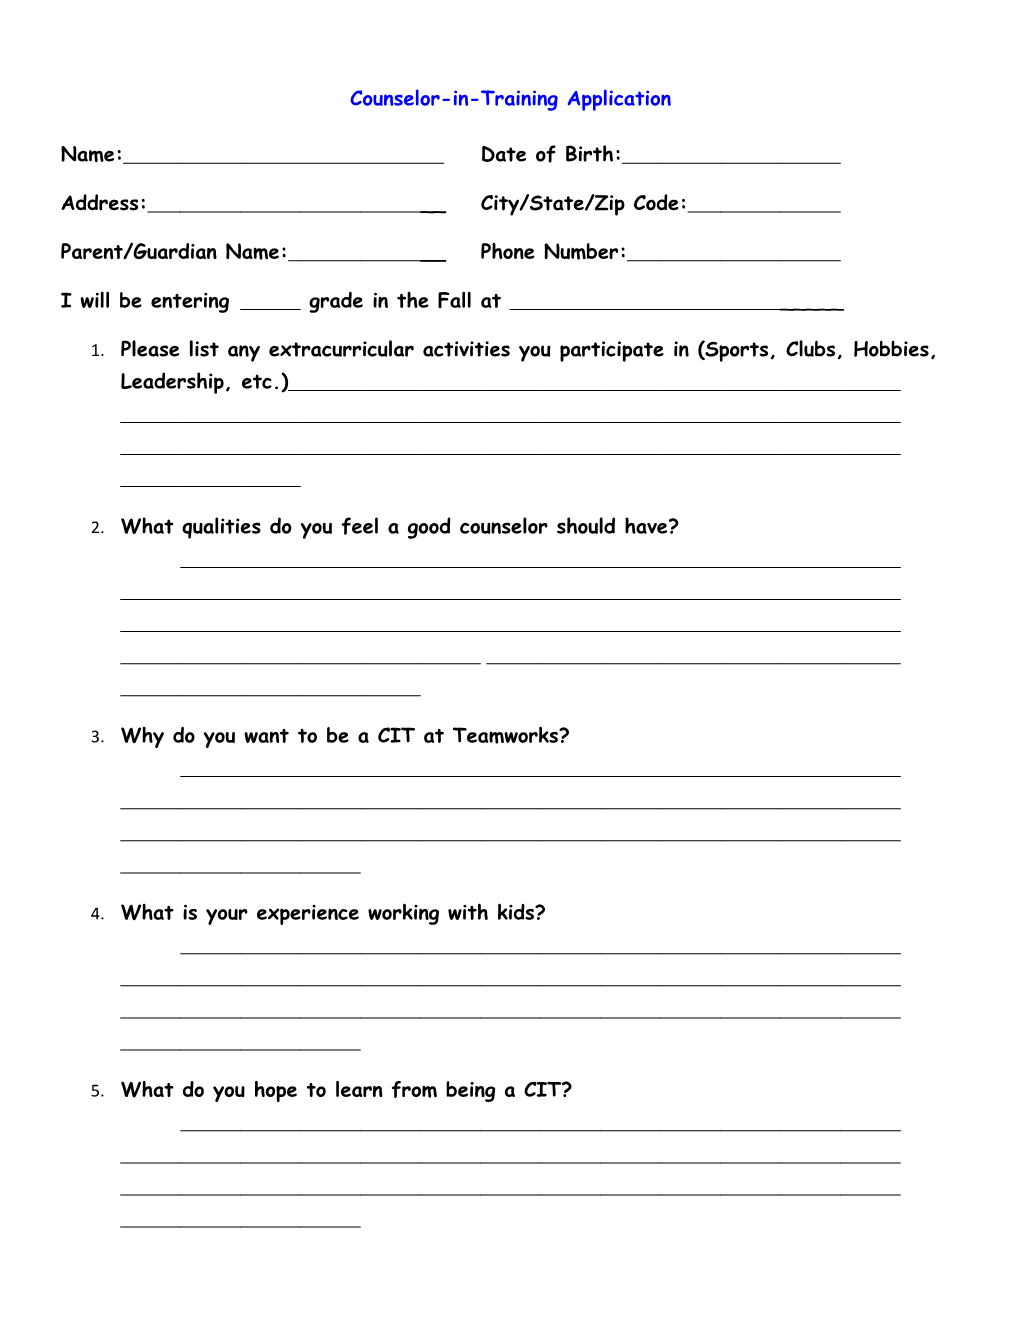 Counselor-In-Training Application